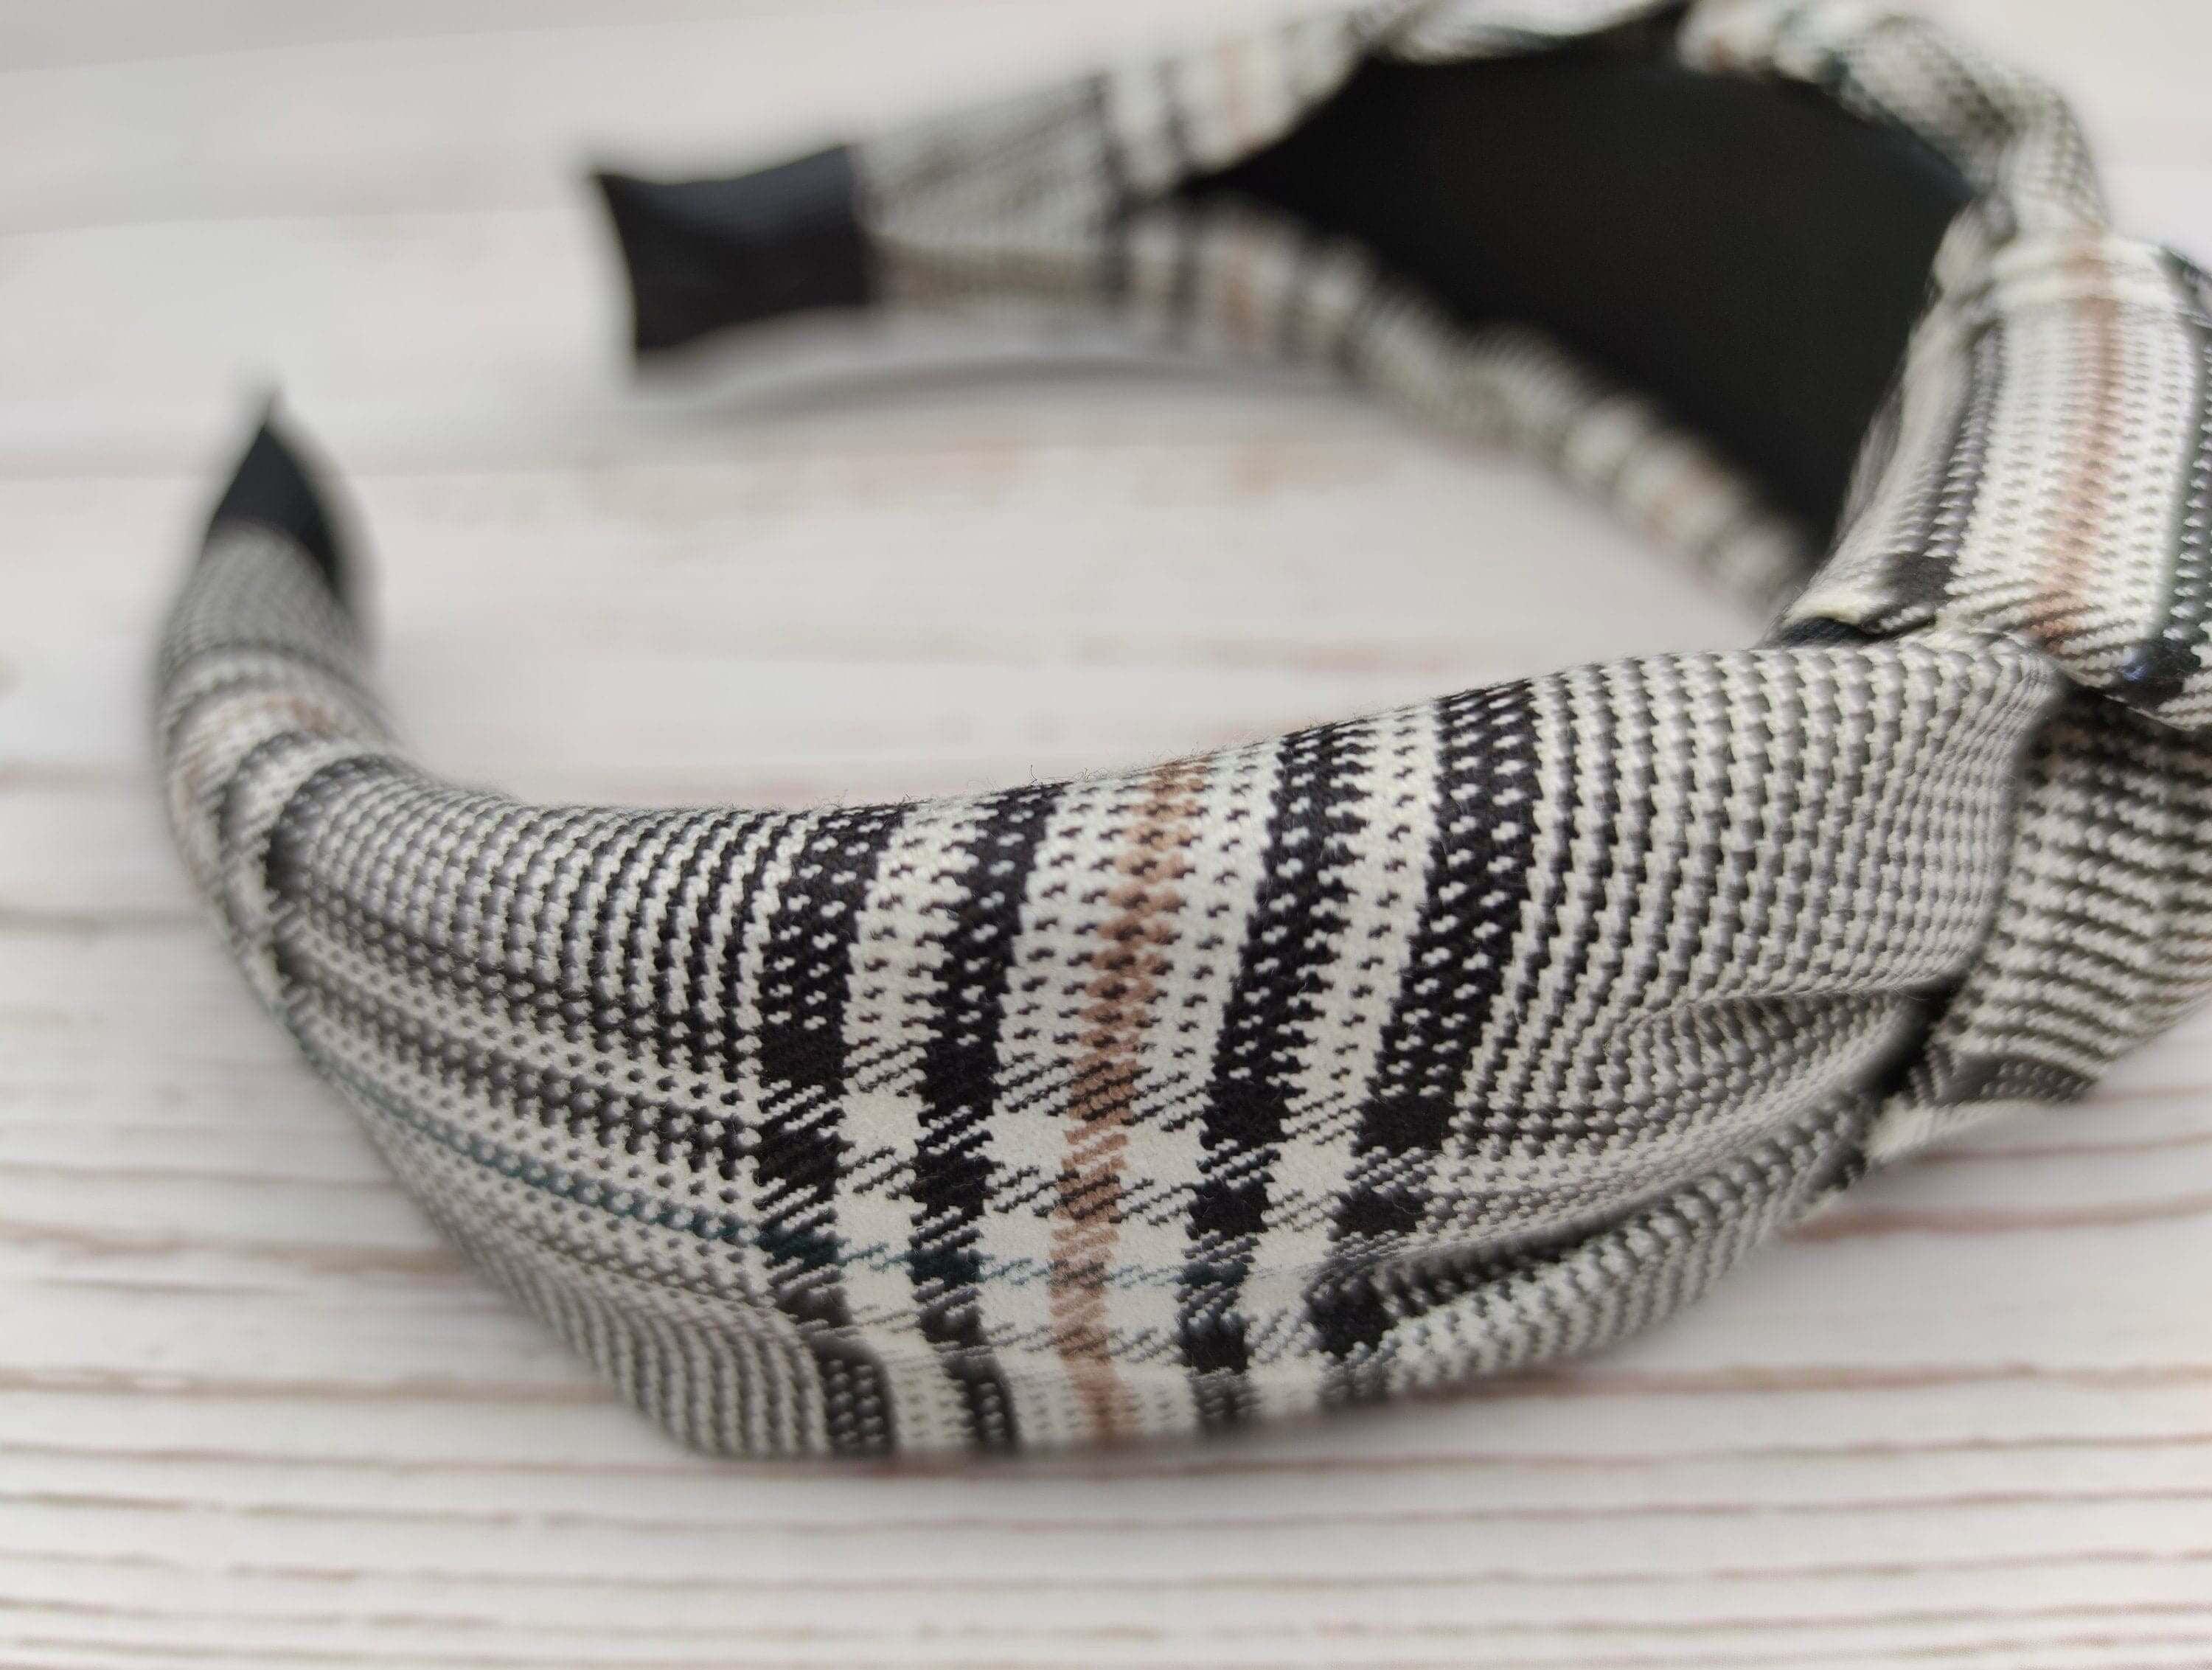 Handcrafted Chic and Versatile Crepe Headband - Perfect for College Girls! White and Black Striped Knotted Headband, Ideal for any Outfit available at Moyoni Design